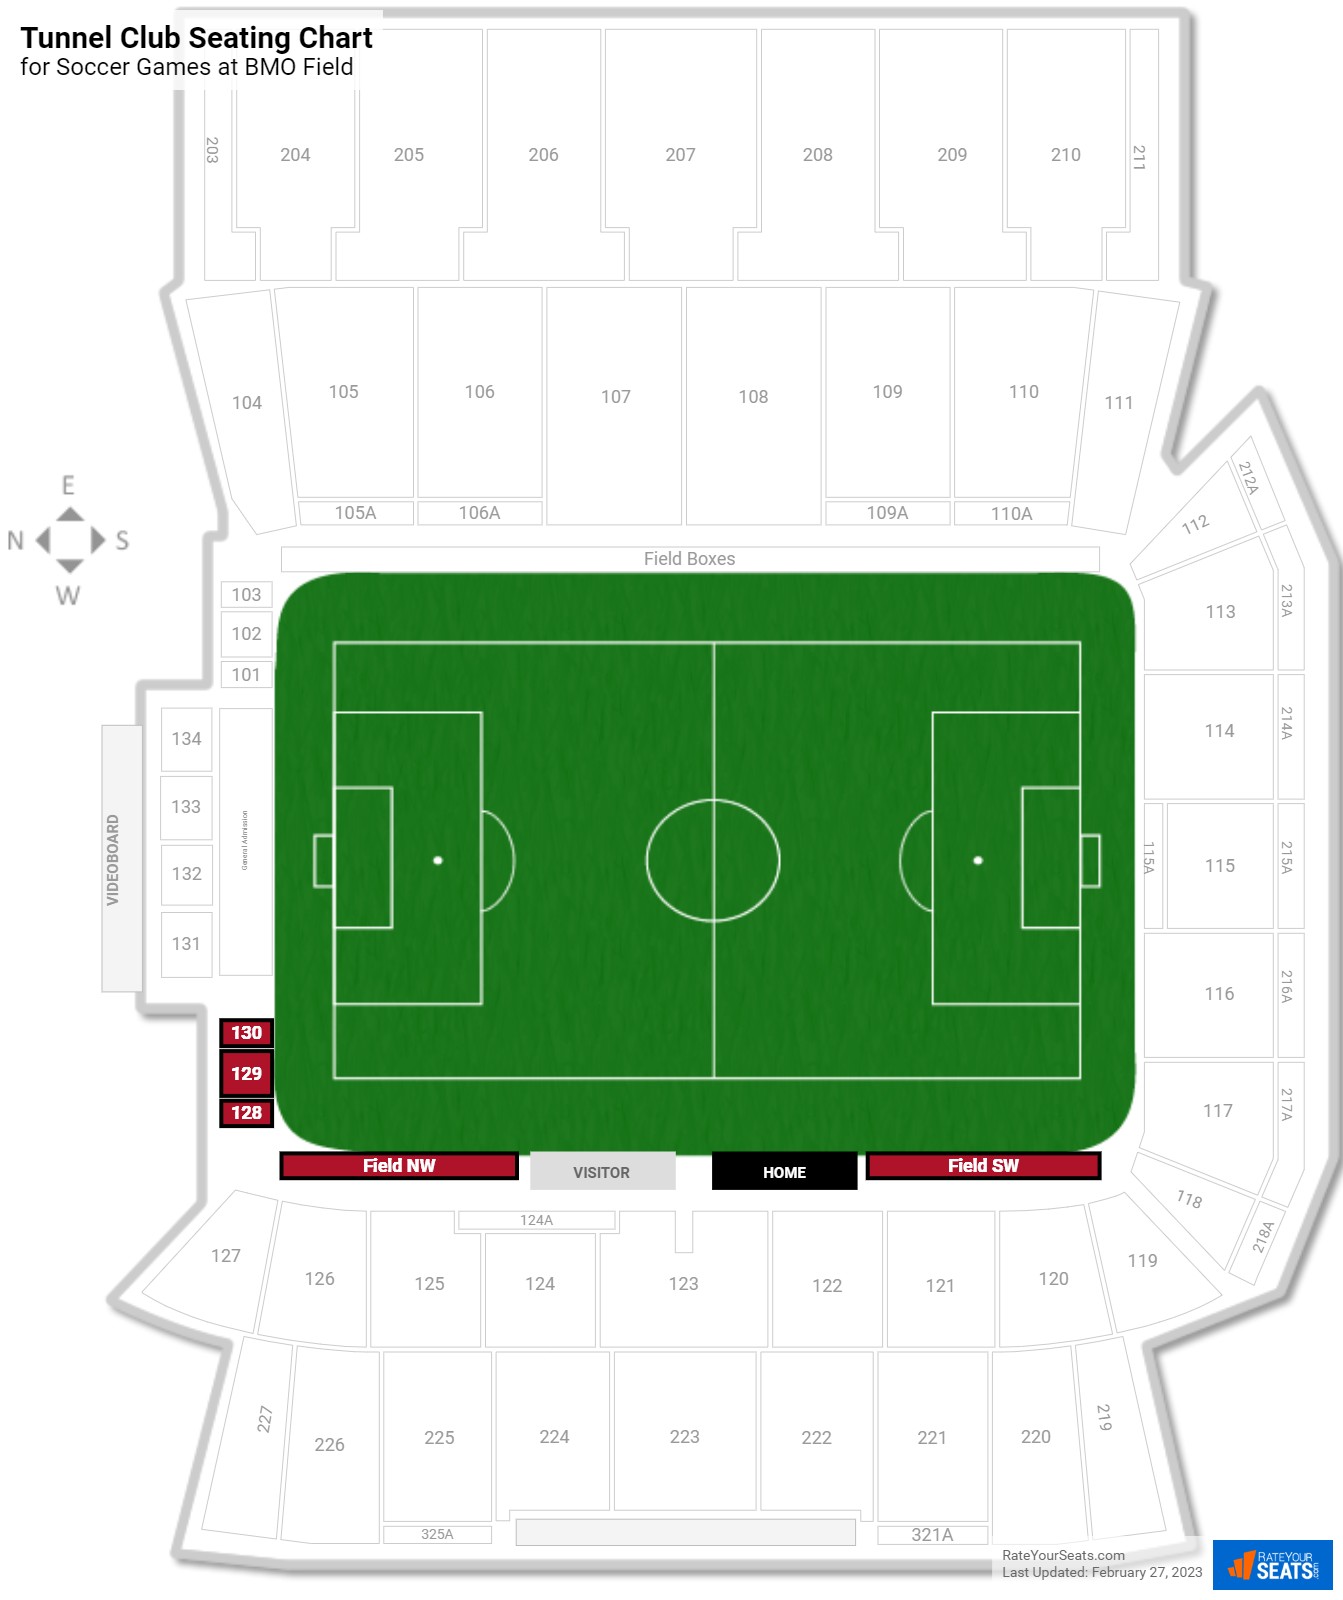 Soccer Tunnel Club Seating Chart at BMO Field